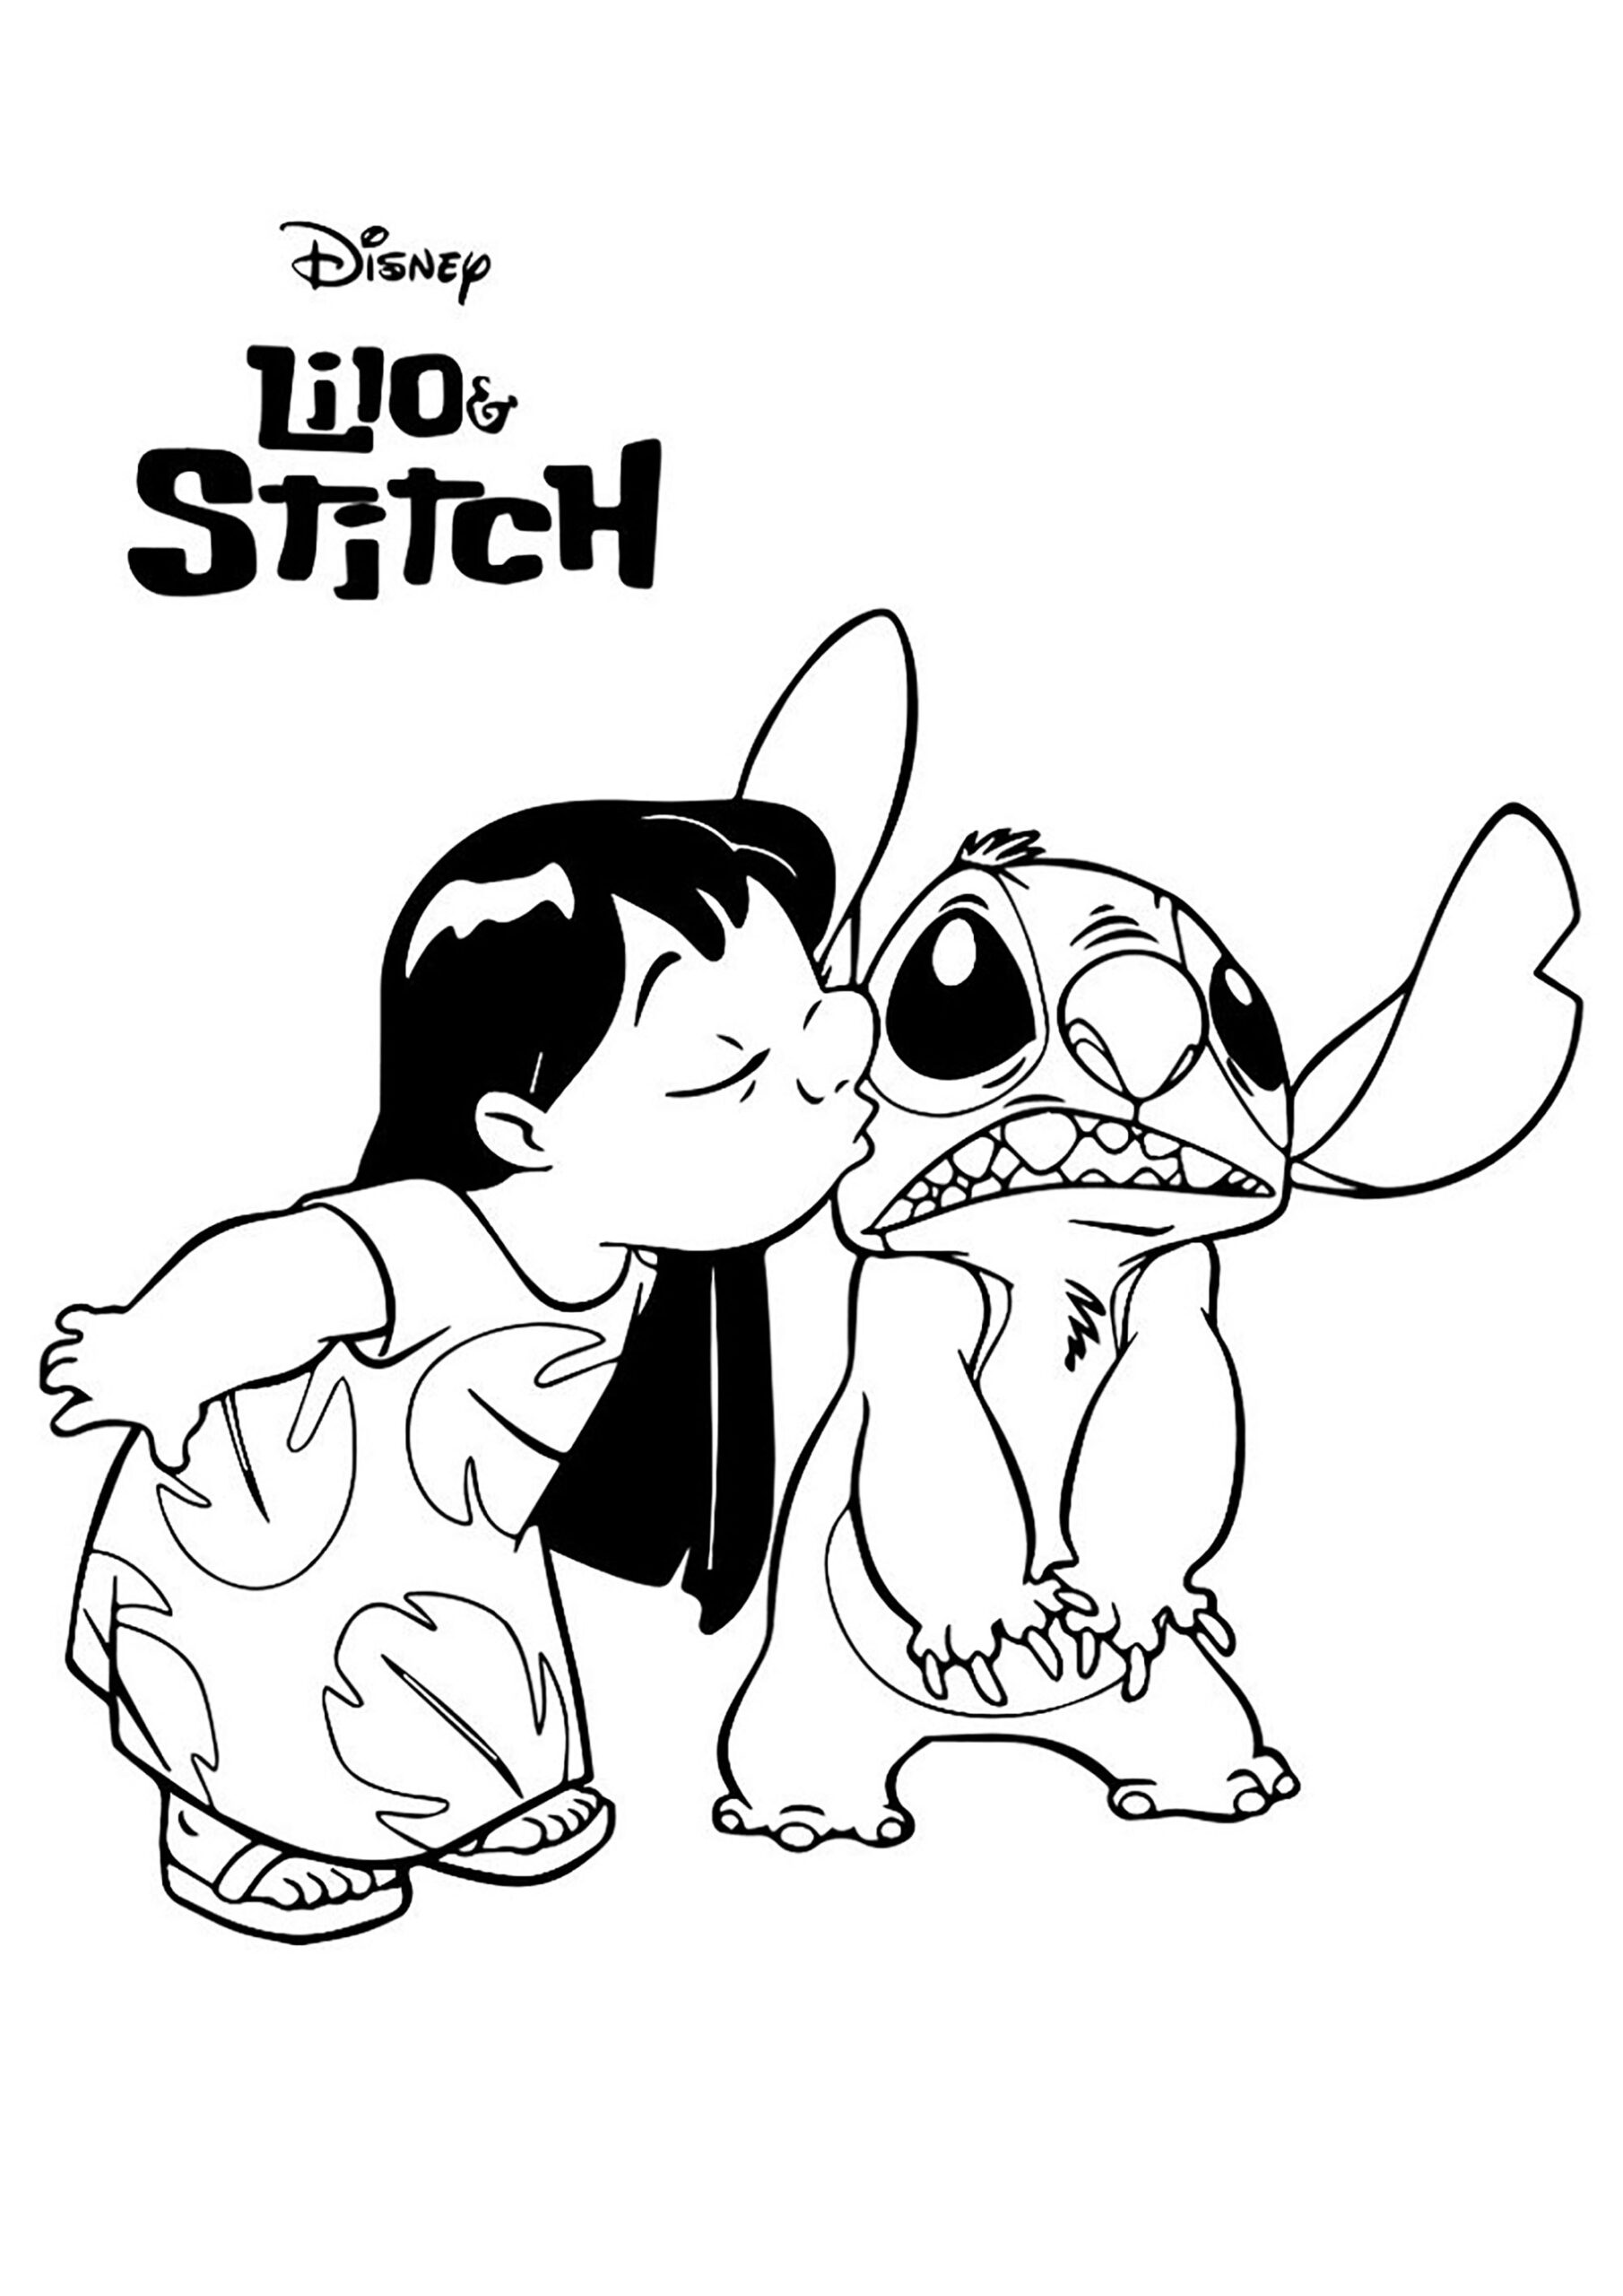 Disney Lilo And Stitch Coloring Pages Sketch Coloring Page à Dessin Stitch Et Angel A Colorier